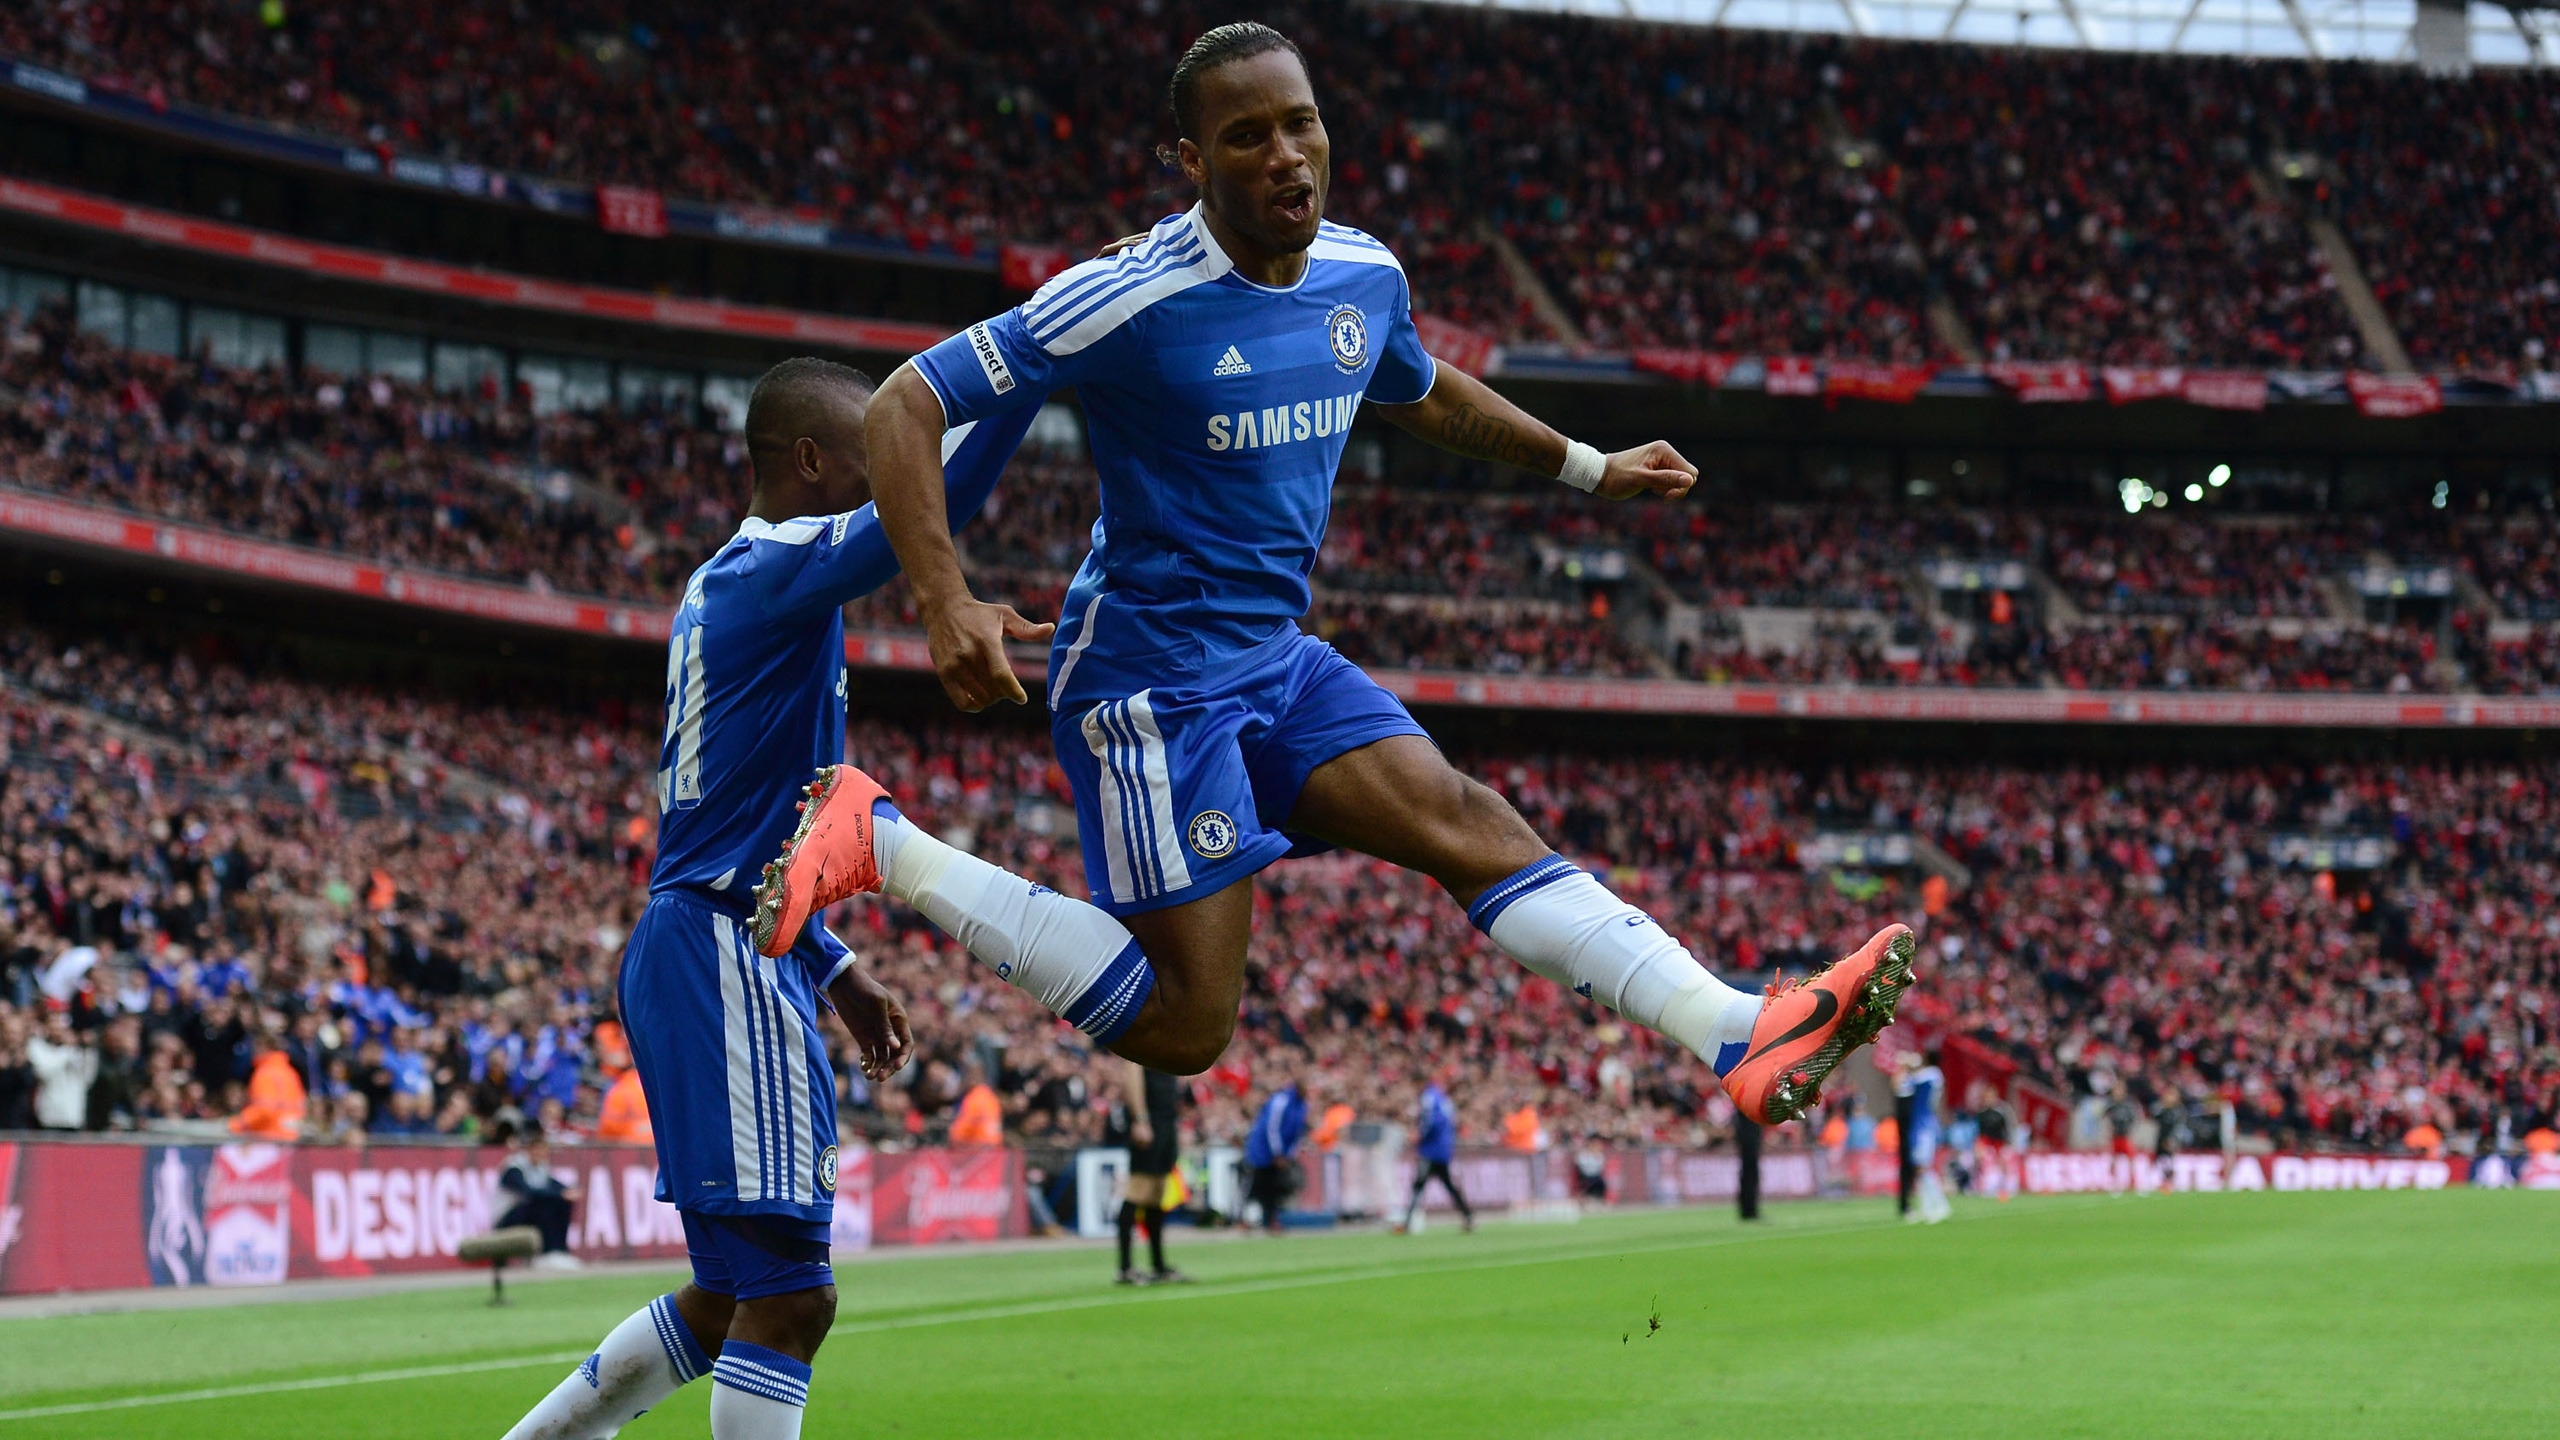 Drogba Jump for 2560x1440 HDTV resolution